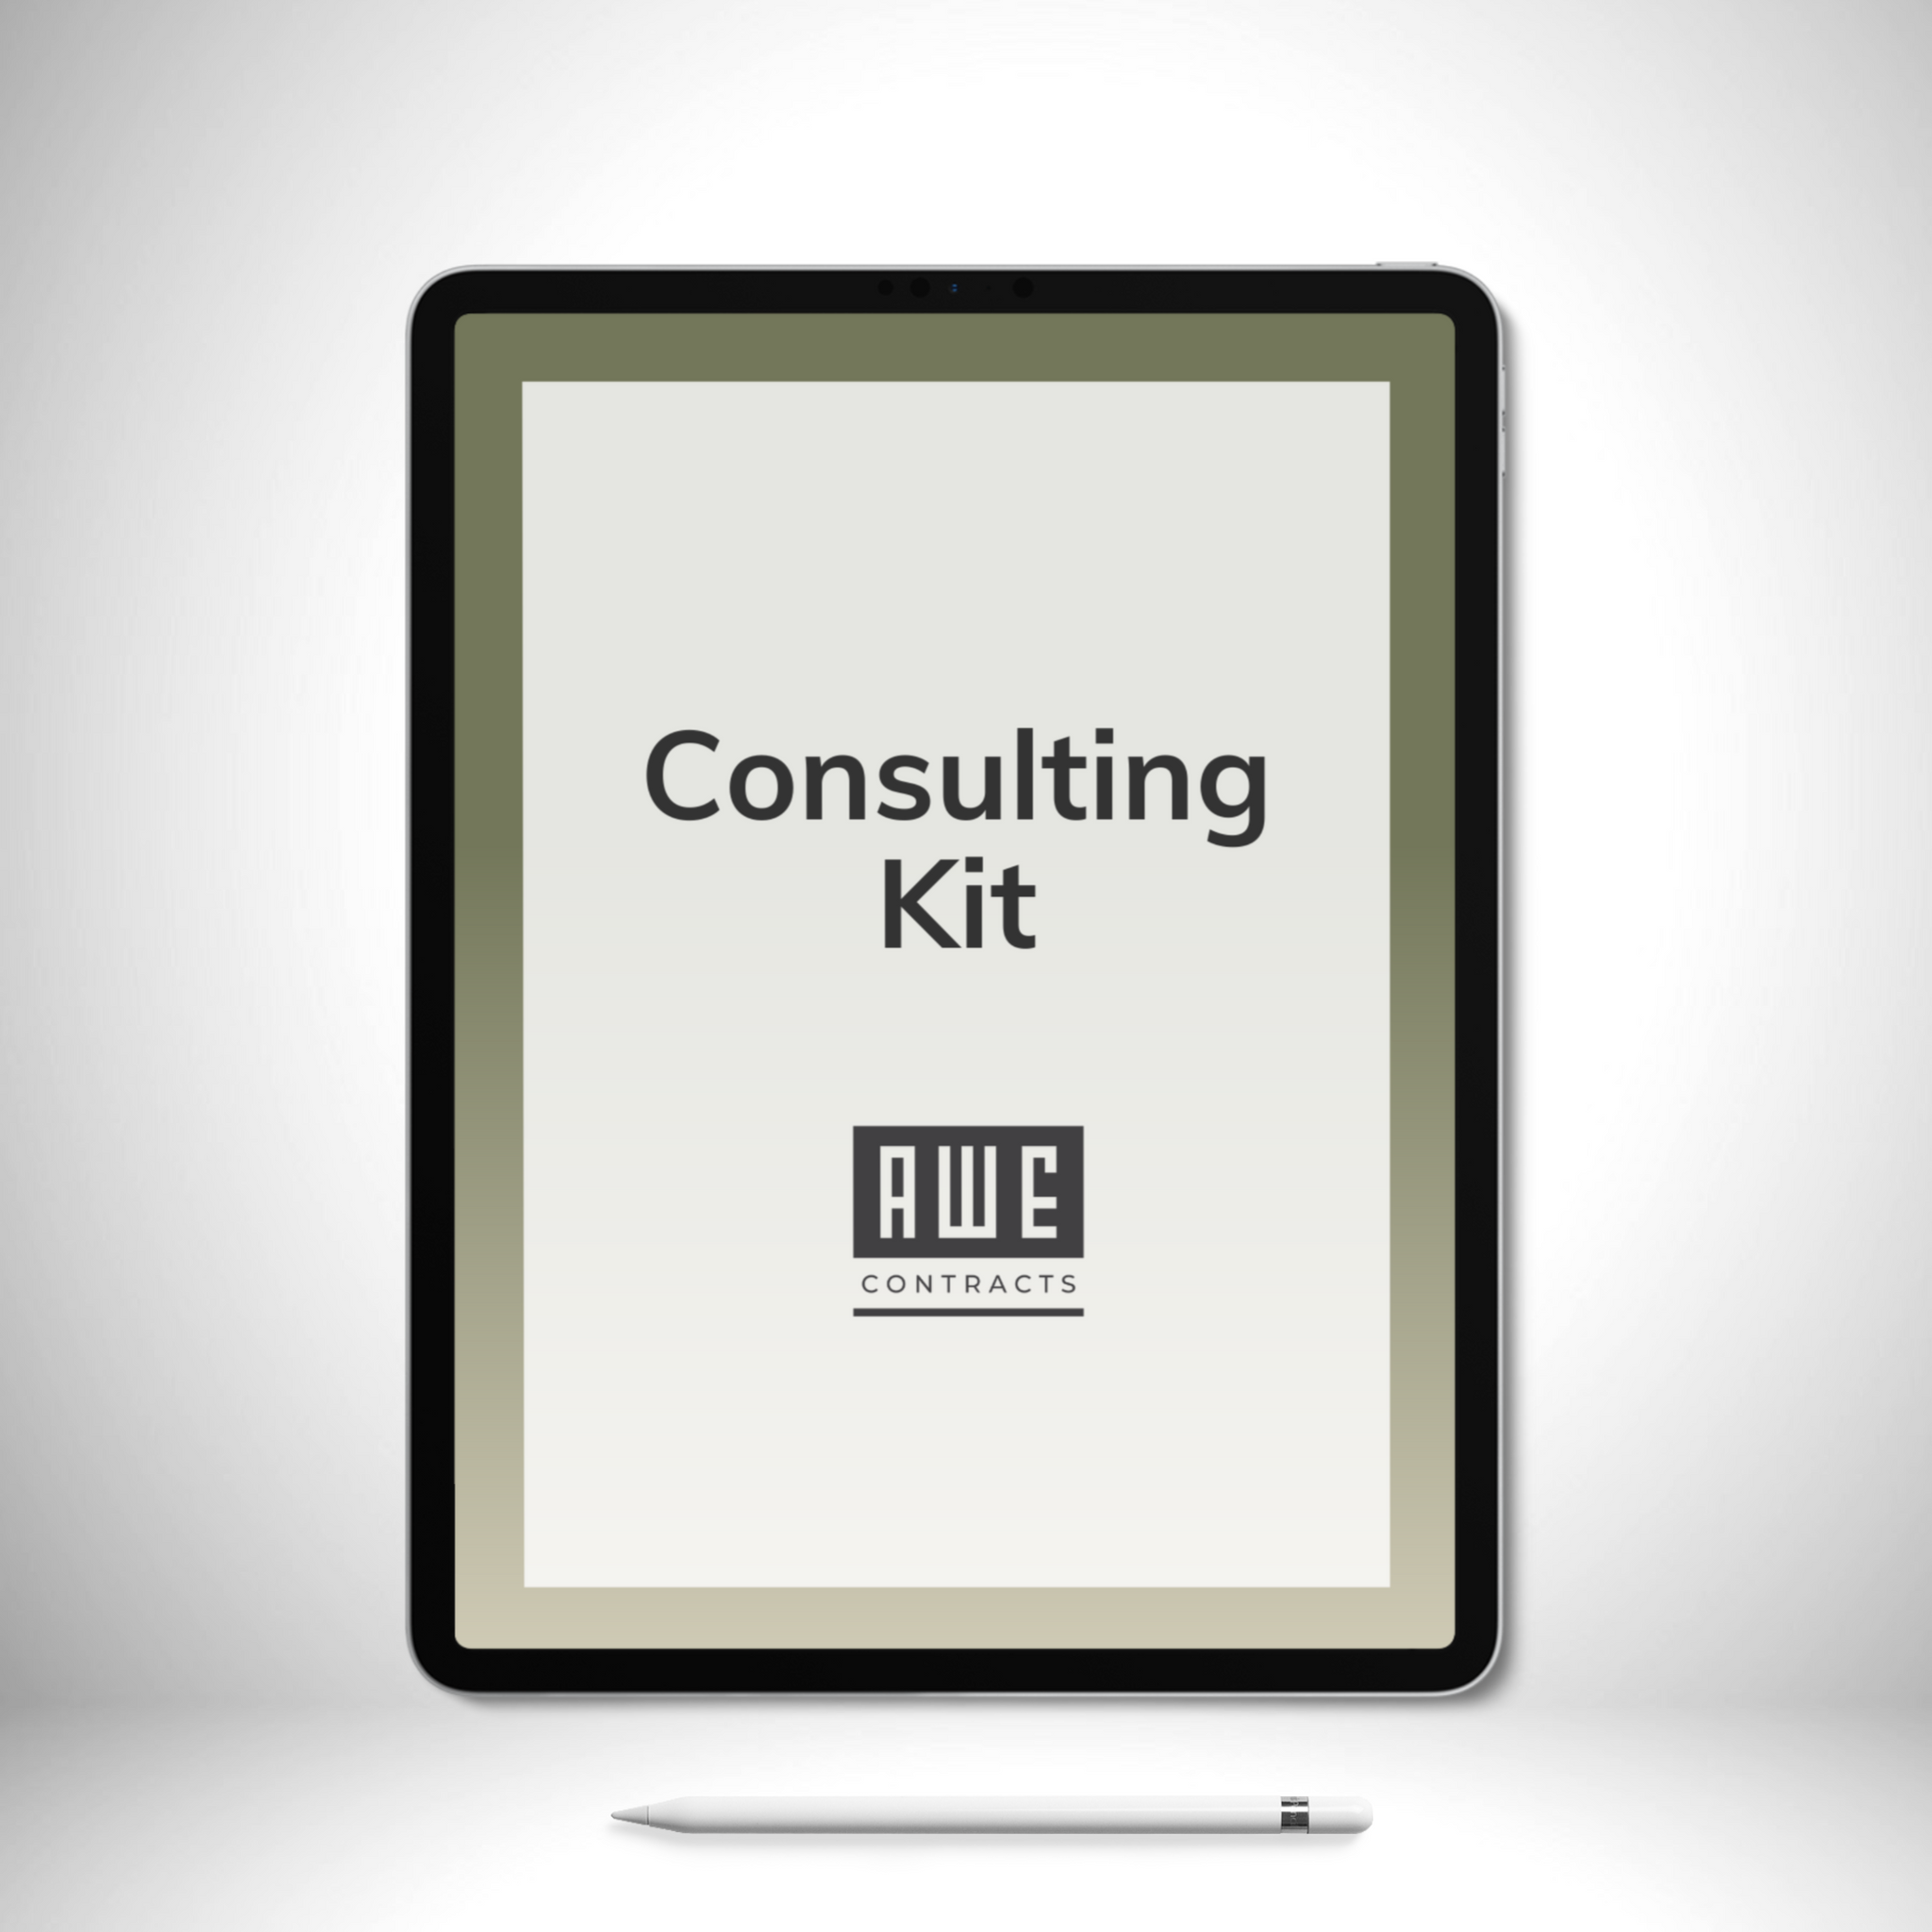 Consulting Kit